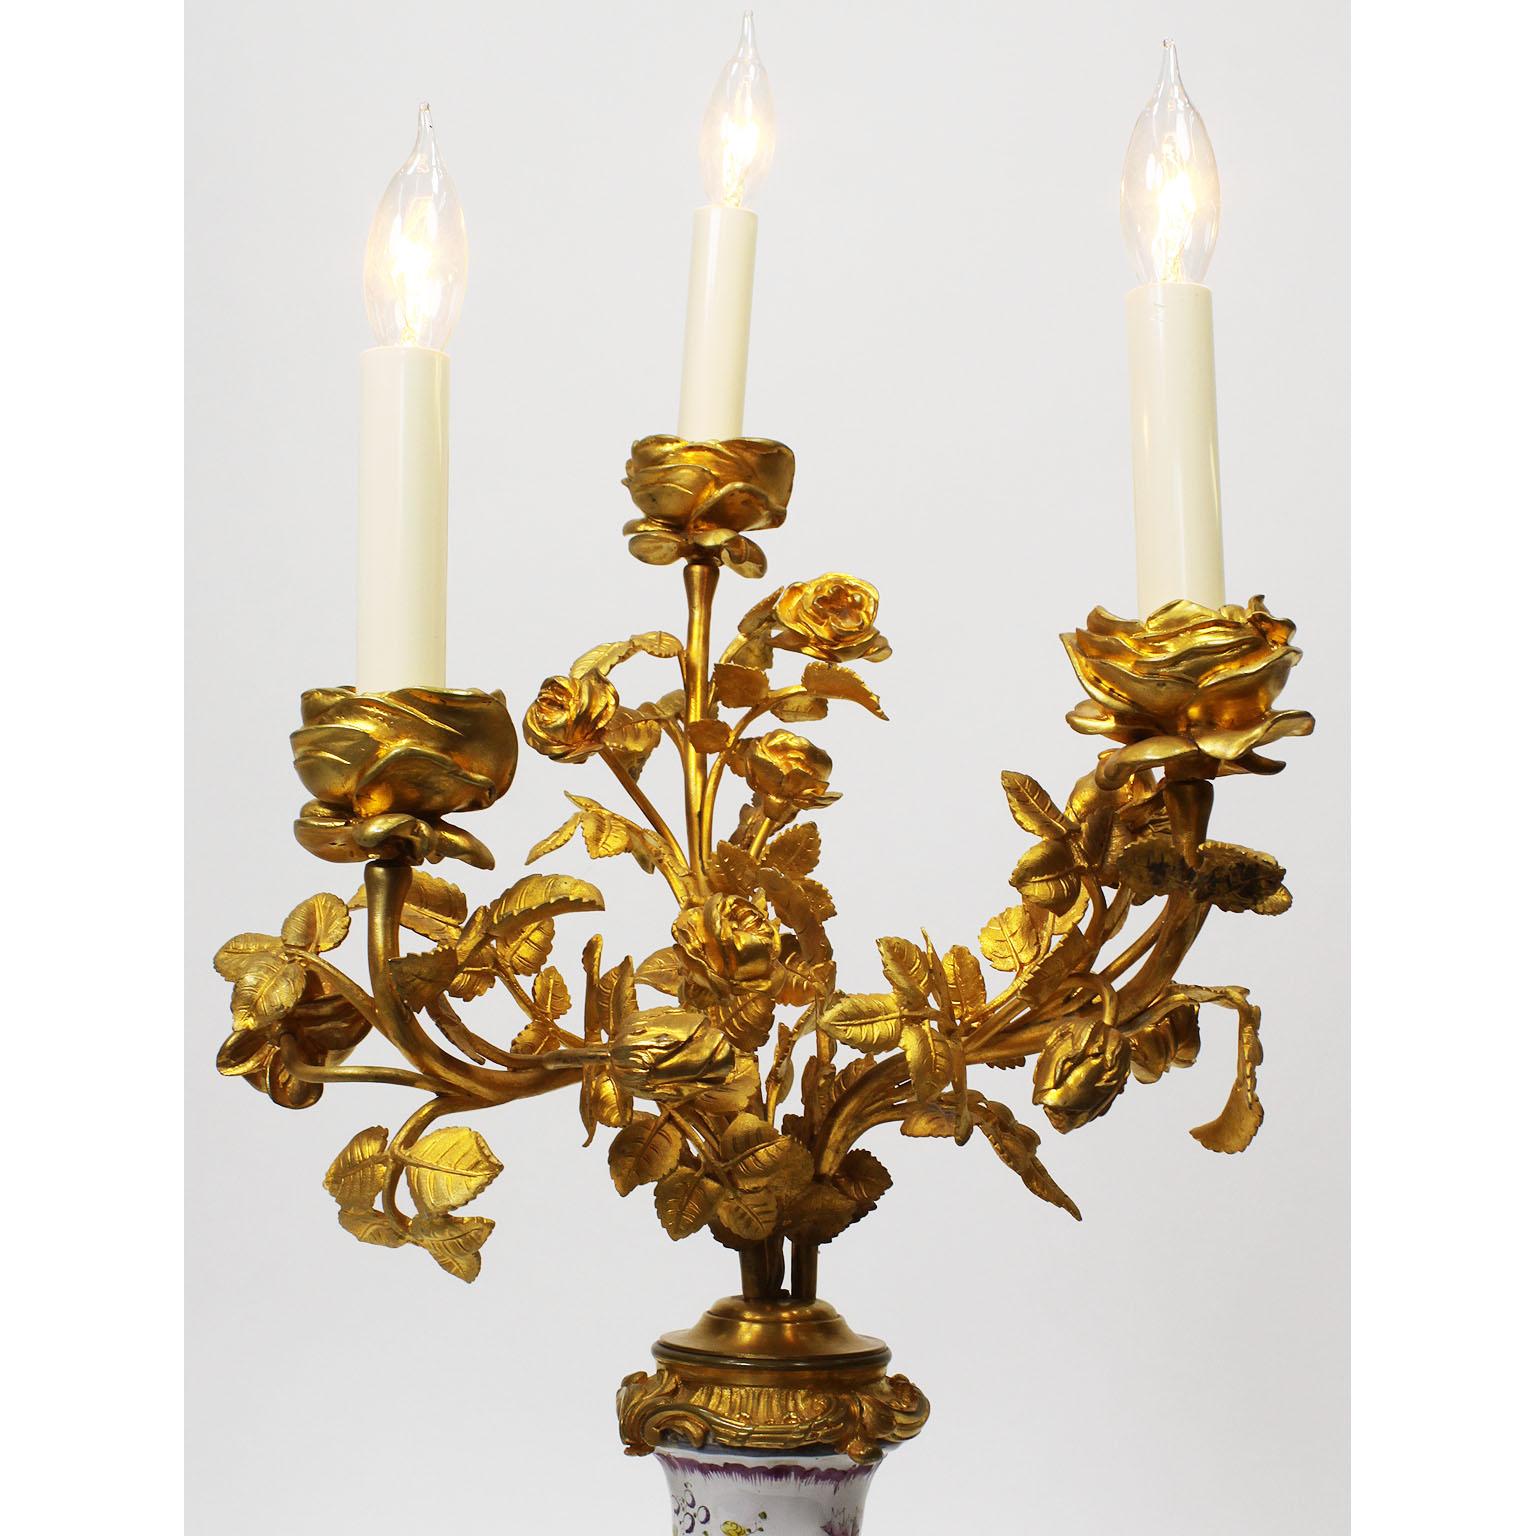 Early 20th Century Pair of 19th Century Gilt-Bronze & Faience Porcelain Table Lamp Candelabras For Sale